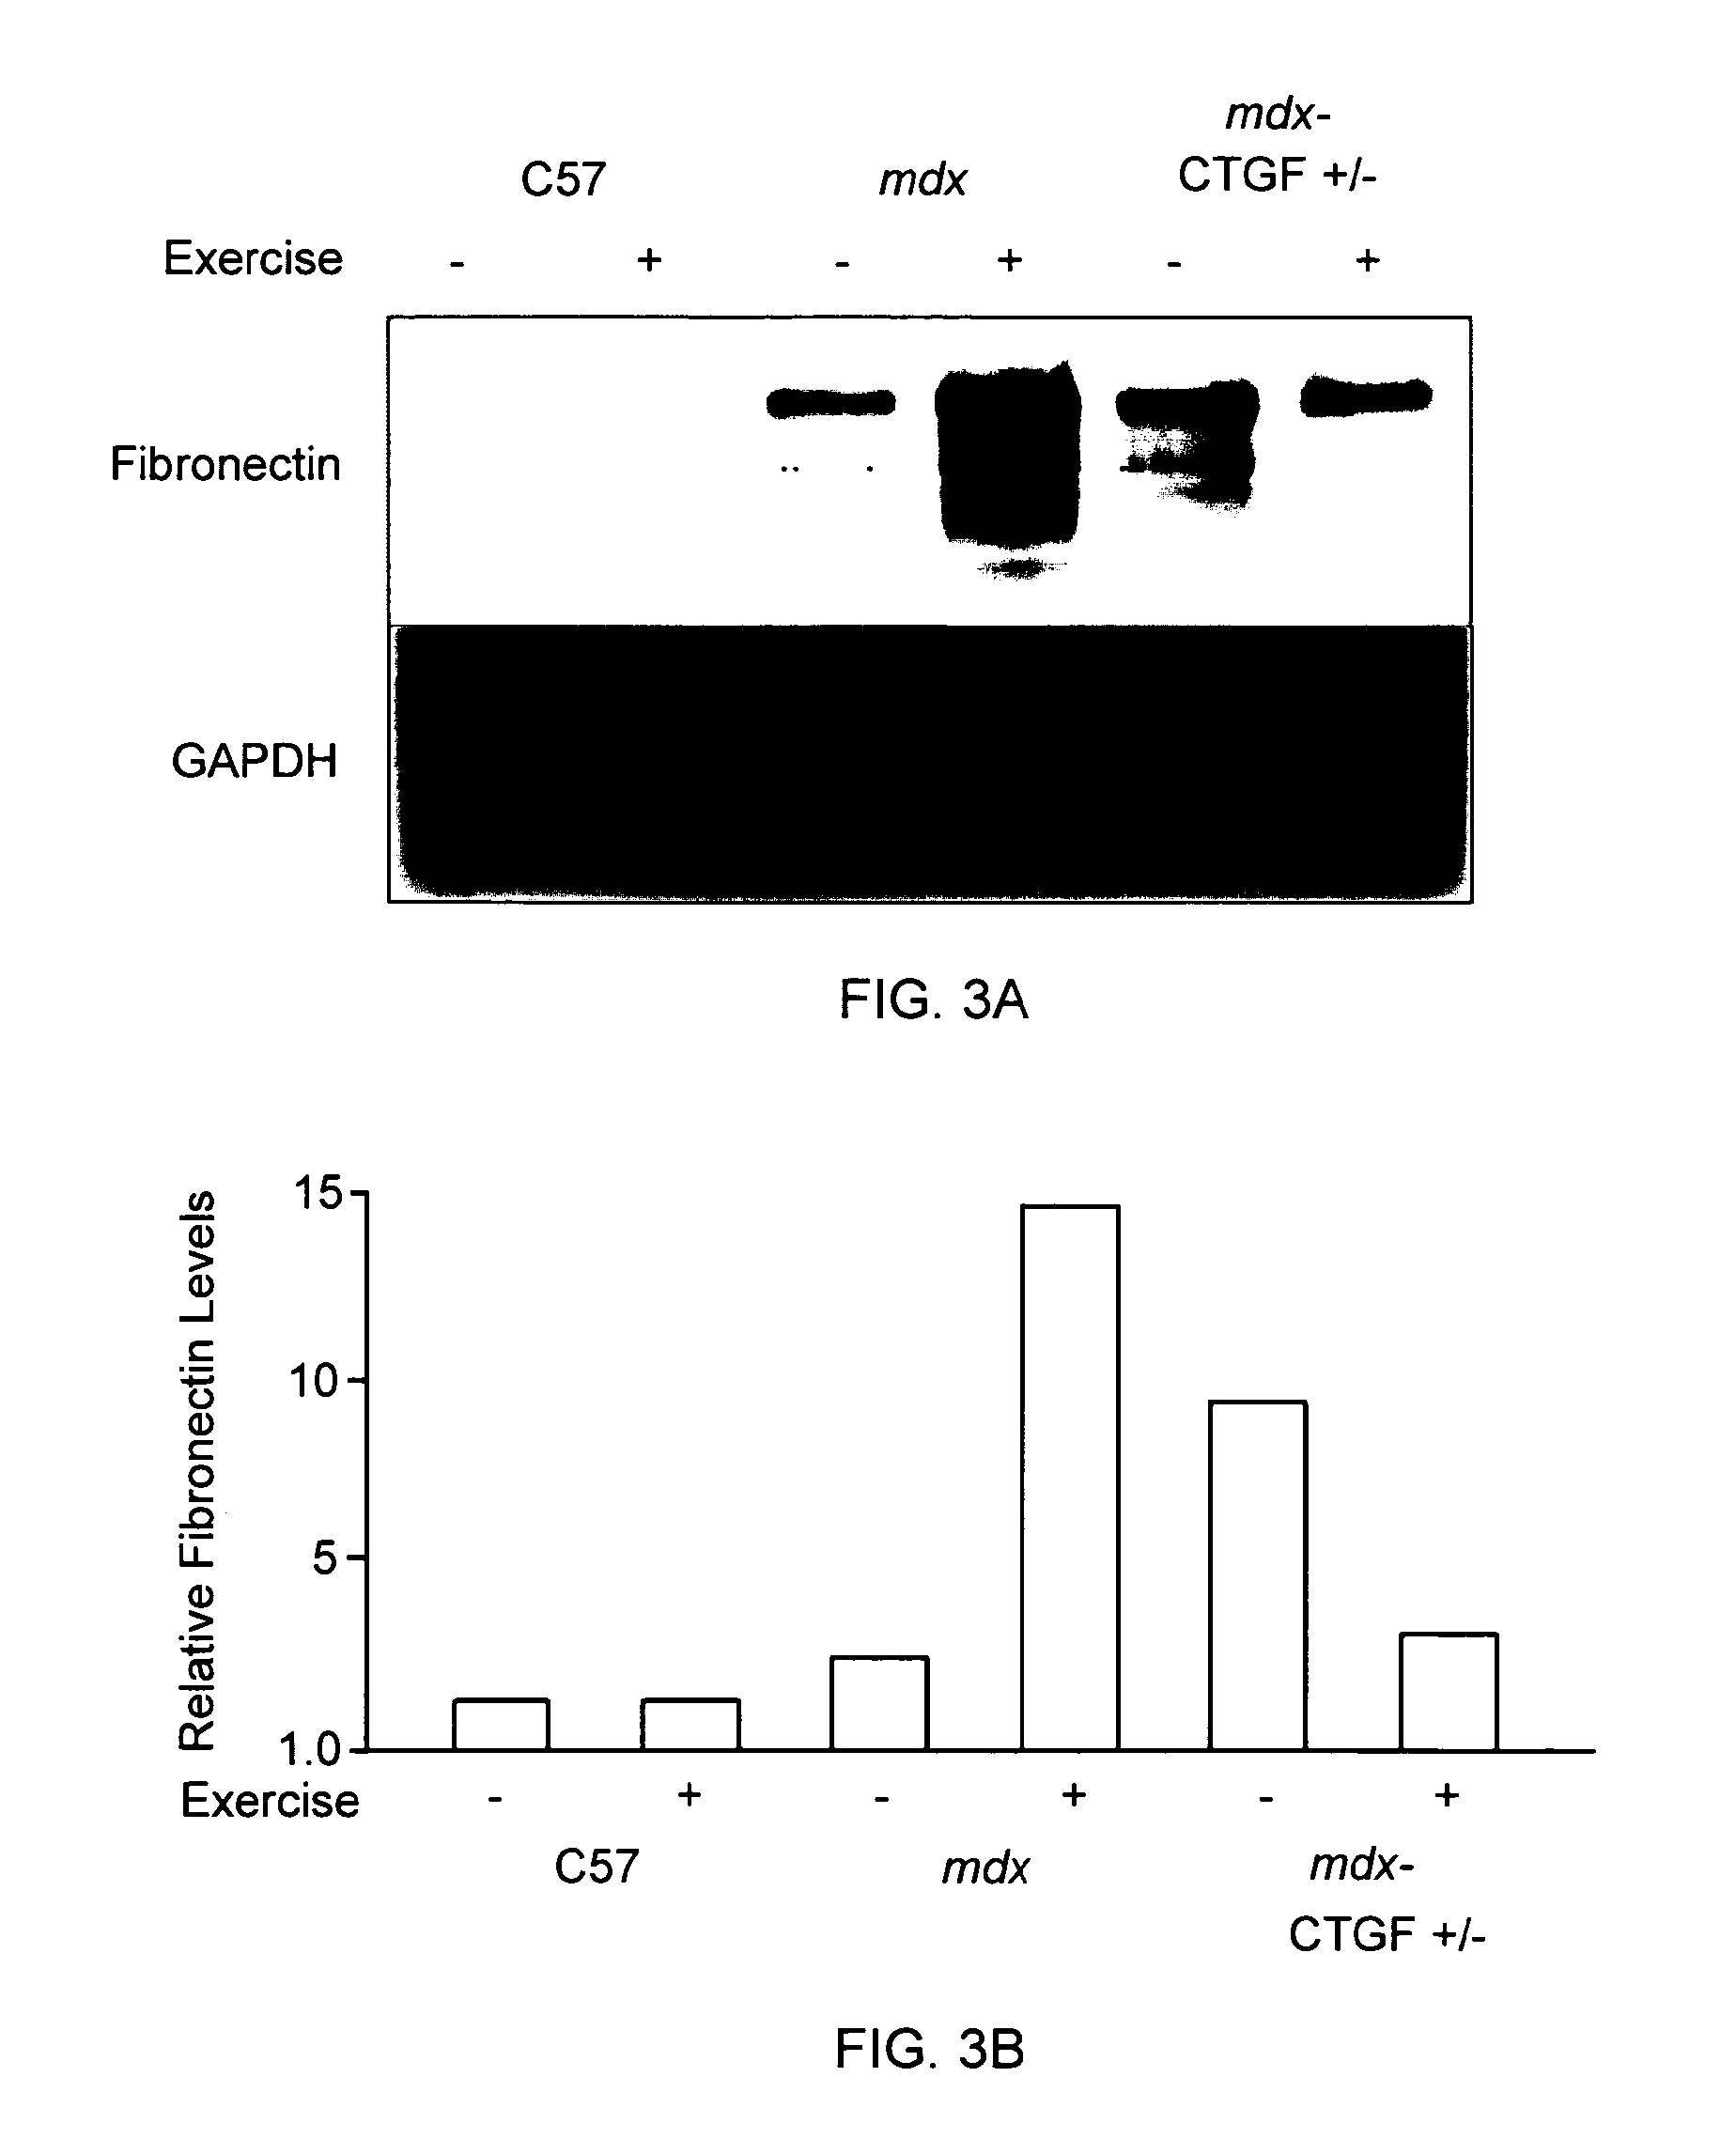 Methods for treatment of muscular dystrophy